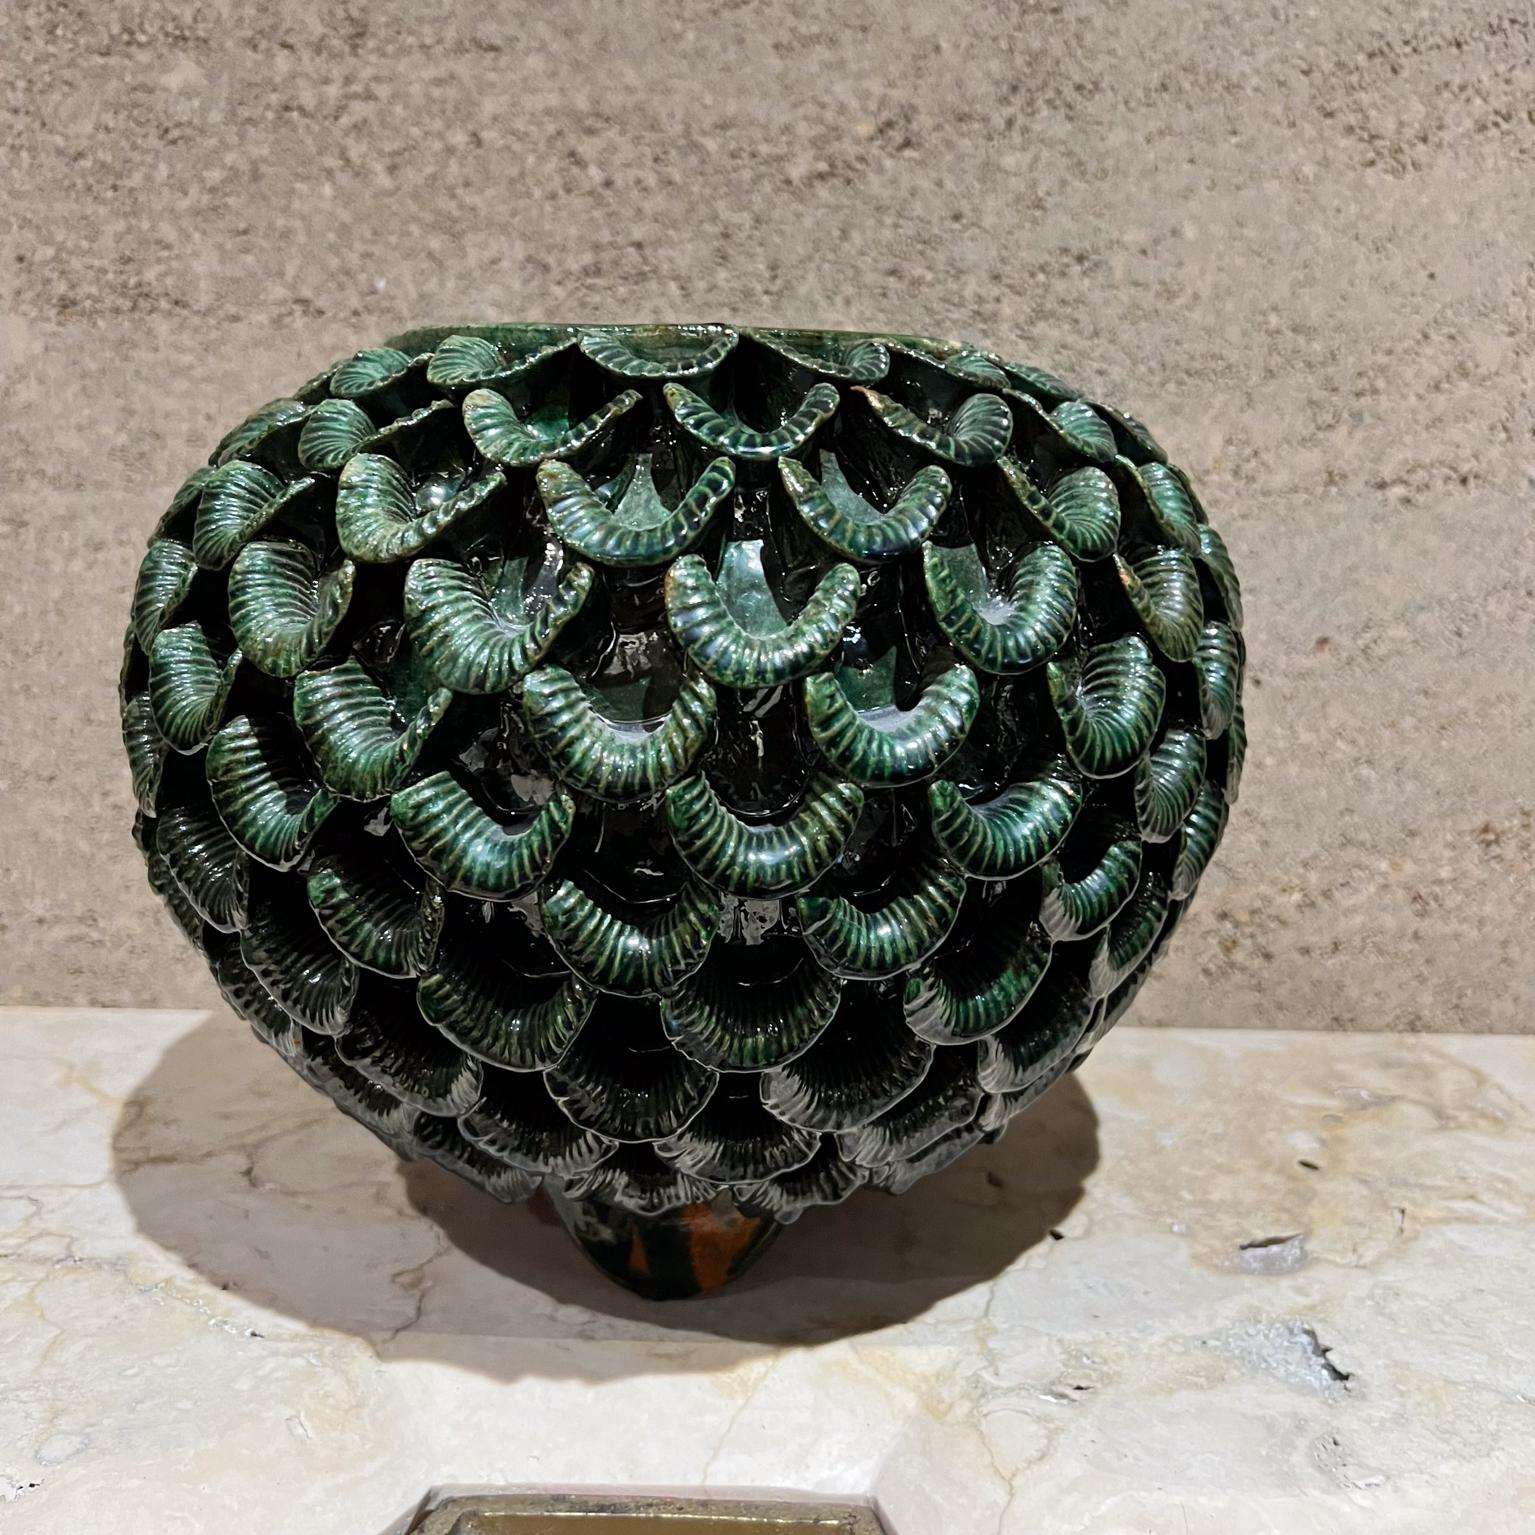 1970s Green Art Pottery Vase Piña Ceramics Michoacán Mexico
8.5 h x 10 diameter
Unsigned
Nicks chipping present
Unrestored original preowned condition
Refer to images provided.